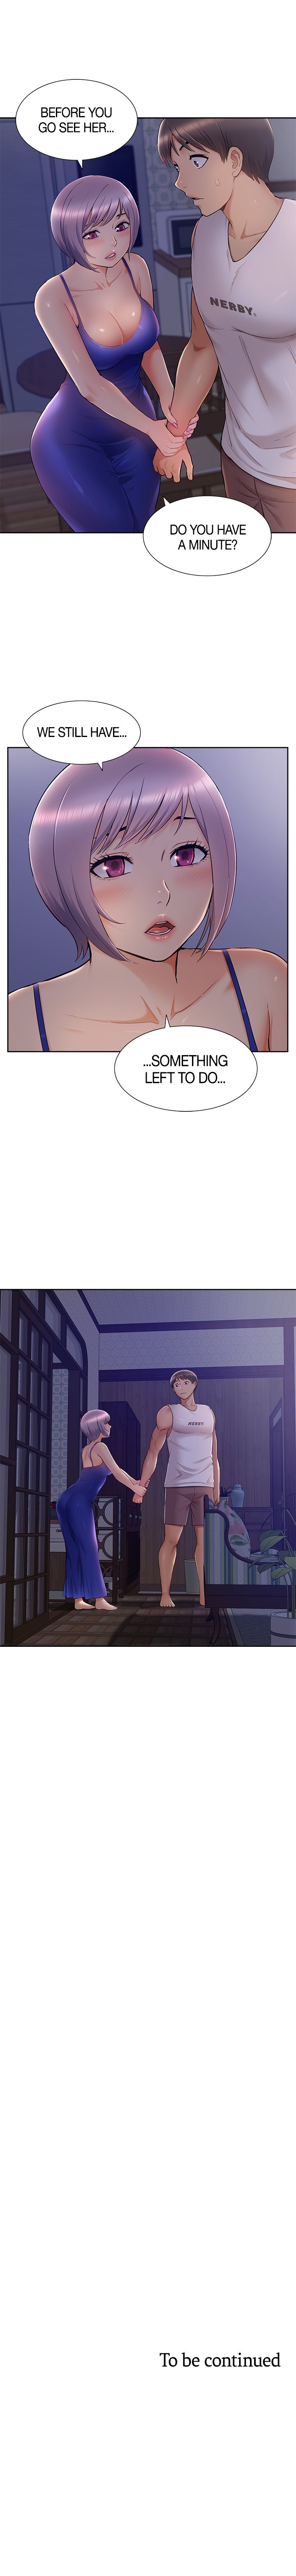 young-mom-and-daughter-chap-31-18